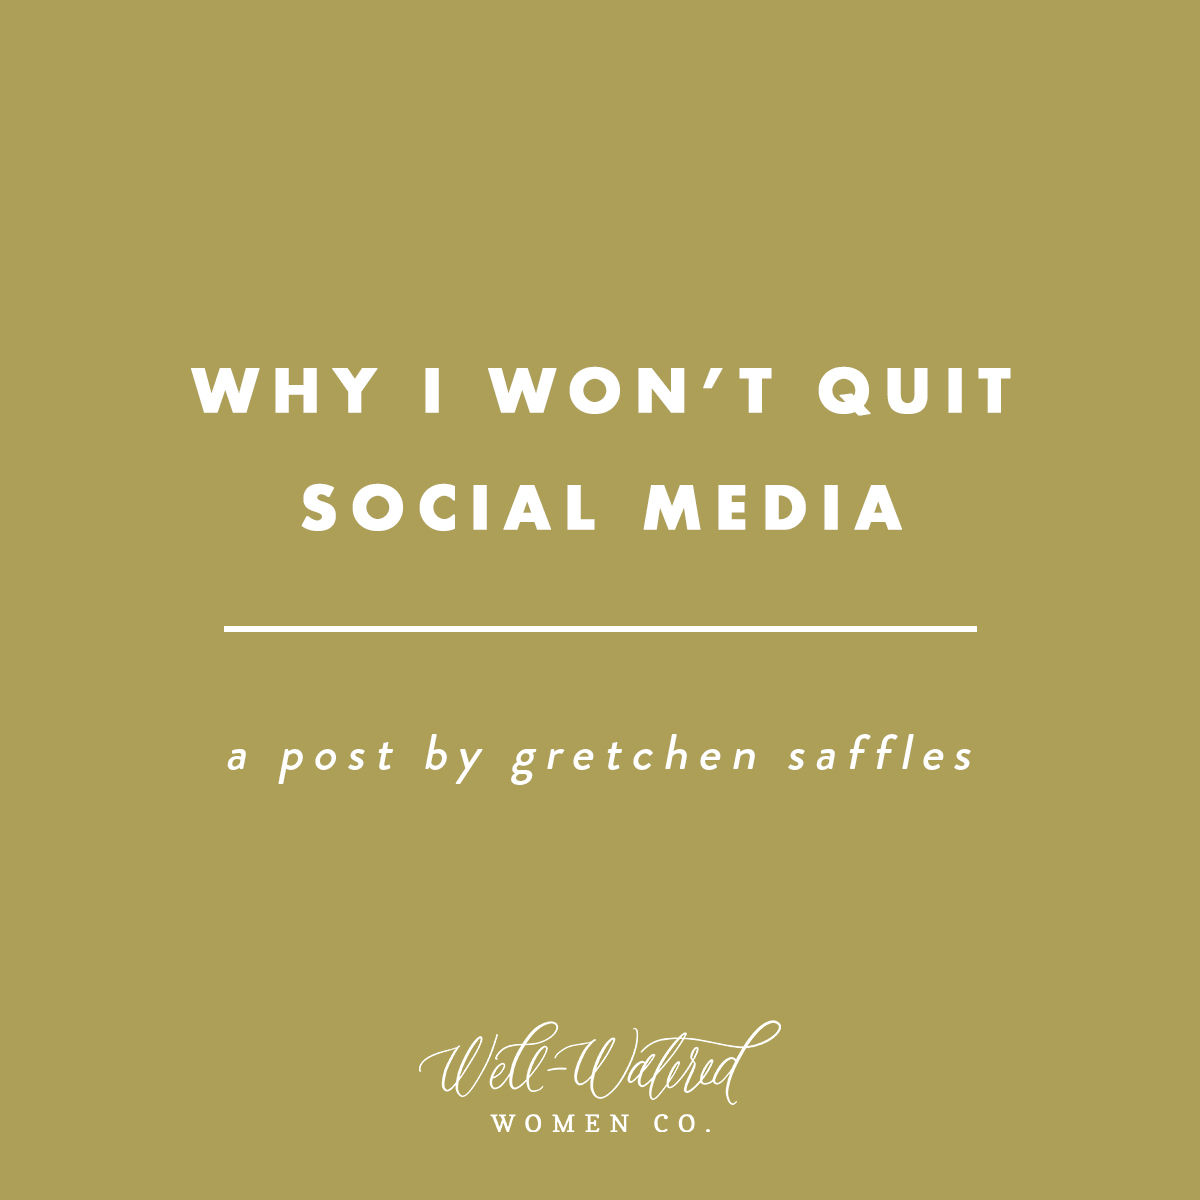 Why I Won't Quit Social Media | Well-Watered Women Articles